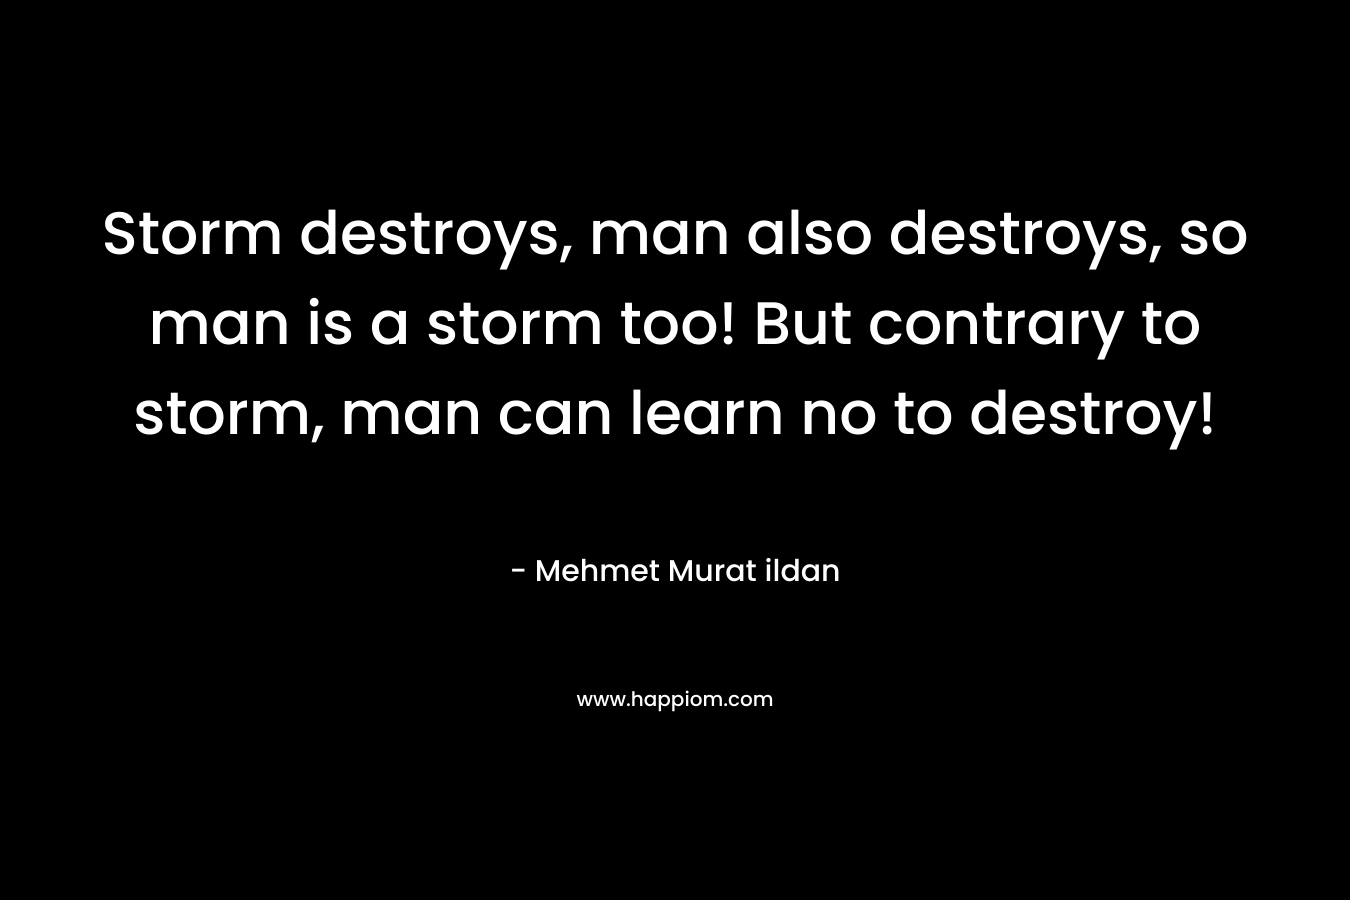 Storm destroys, man also destroys, so man is a storm too! But contrary to storm, man can learn no to destroy!